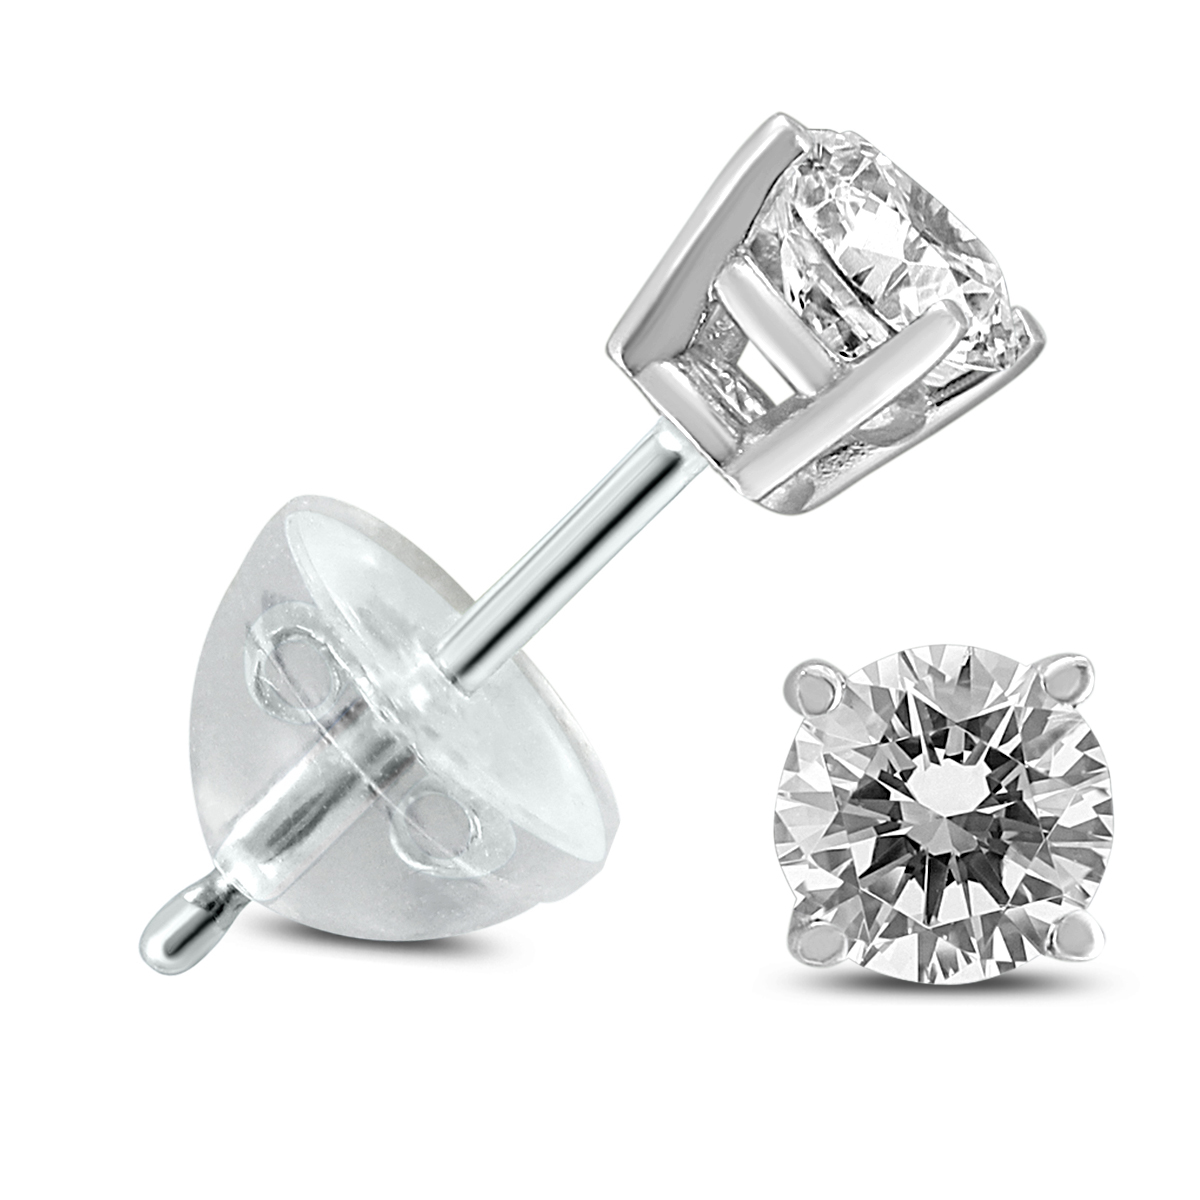 .18CTW Round Diamond Solitaire Stud Earrings In 14k White Gold with Silicon Backs